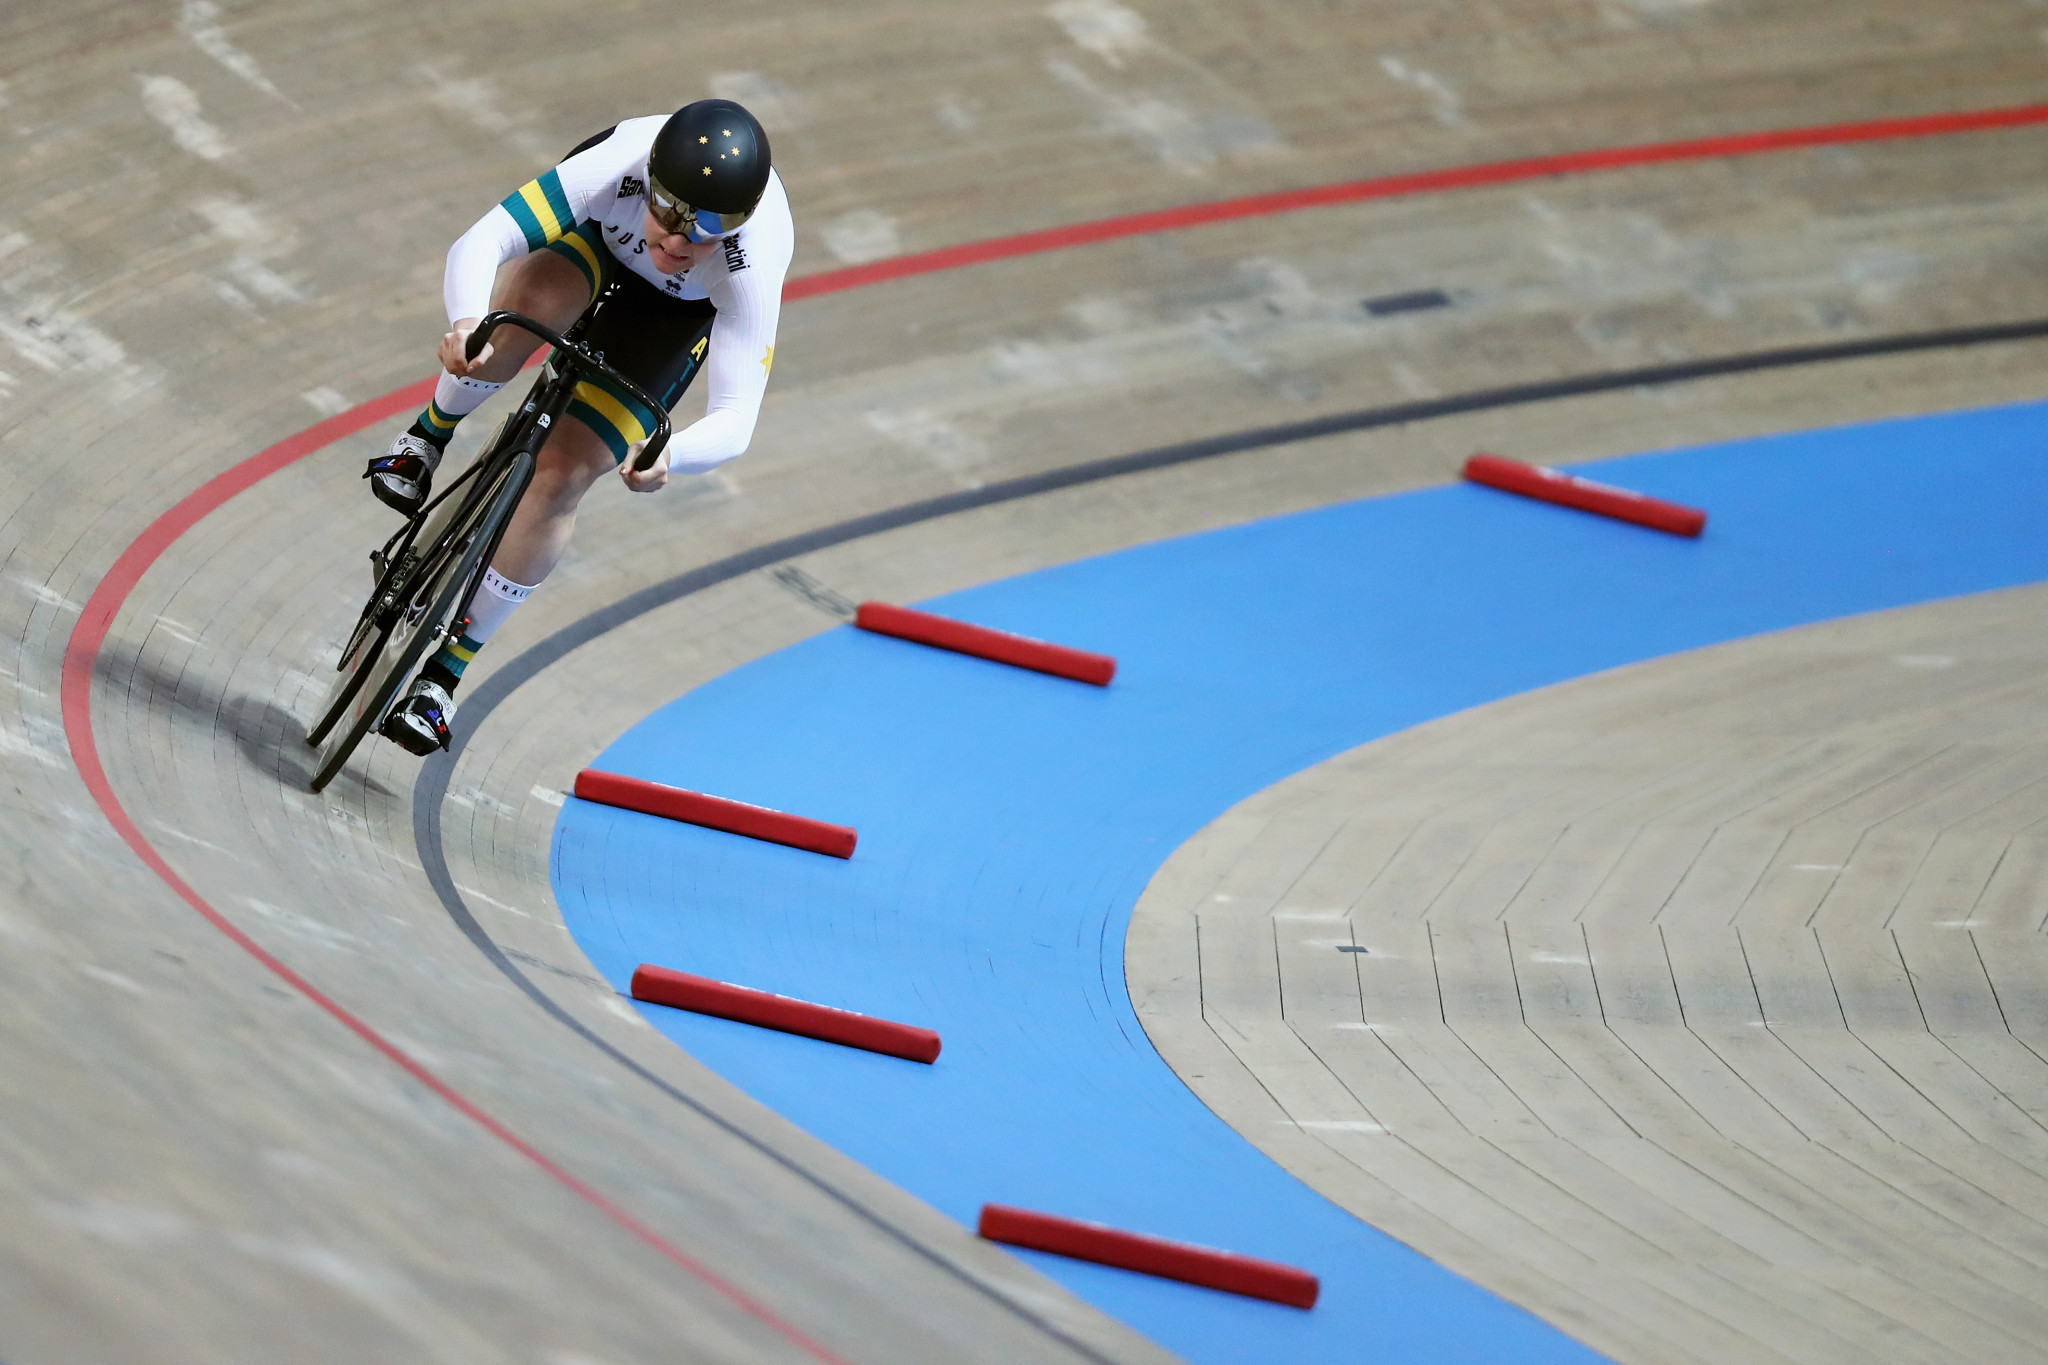 Sprint star Morton takes gold on final day of Oceania Track Cycling Championships